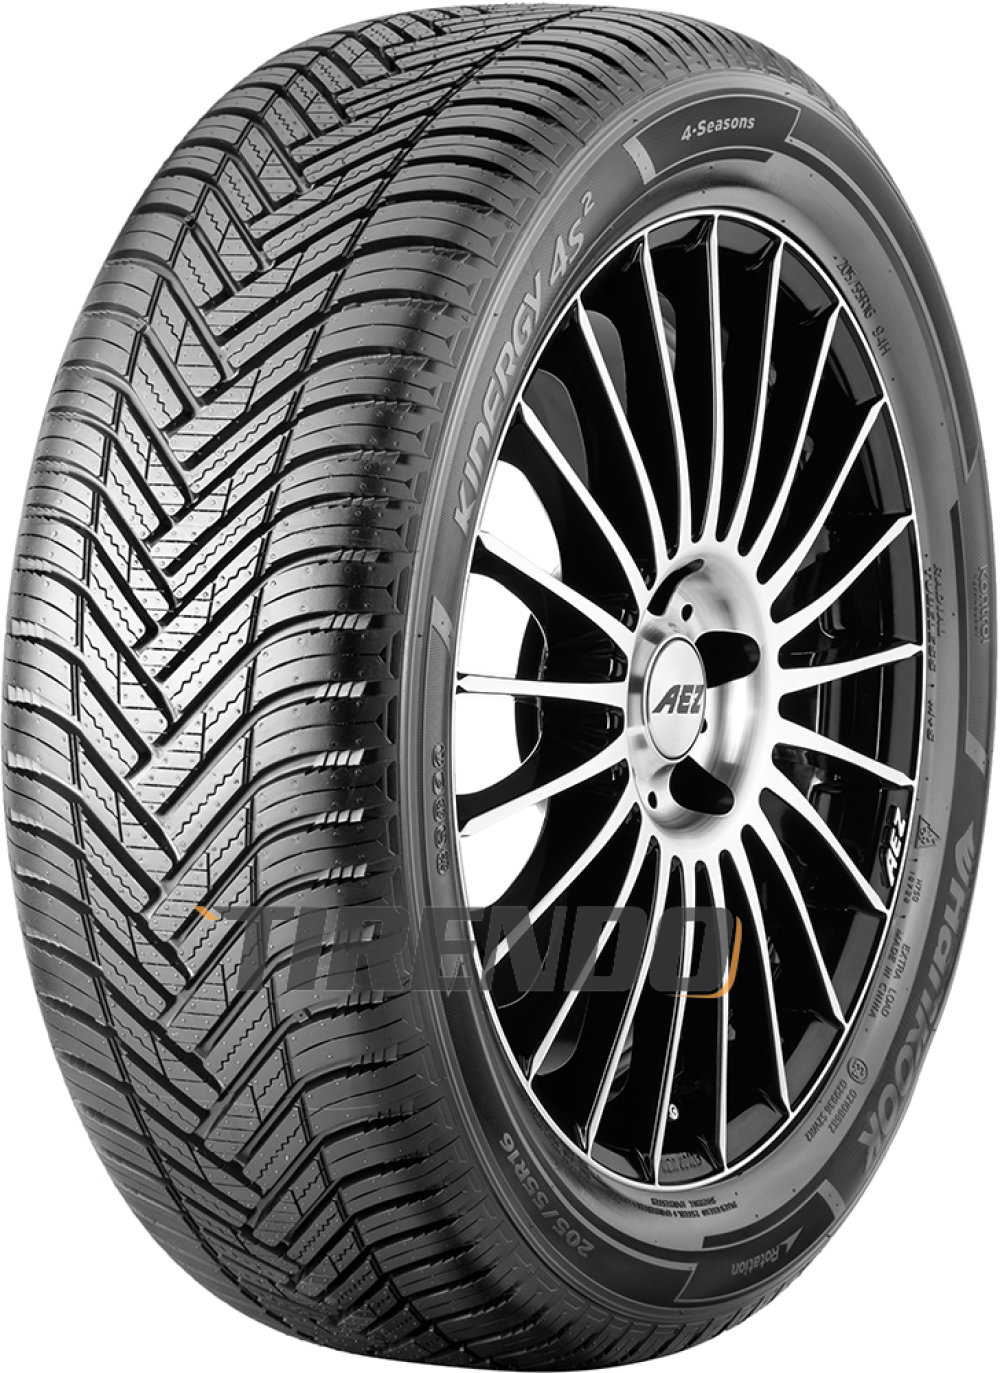 Image of Hankook Kinergy 4S² H750 ( 165/70 R14 85T XL )